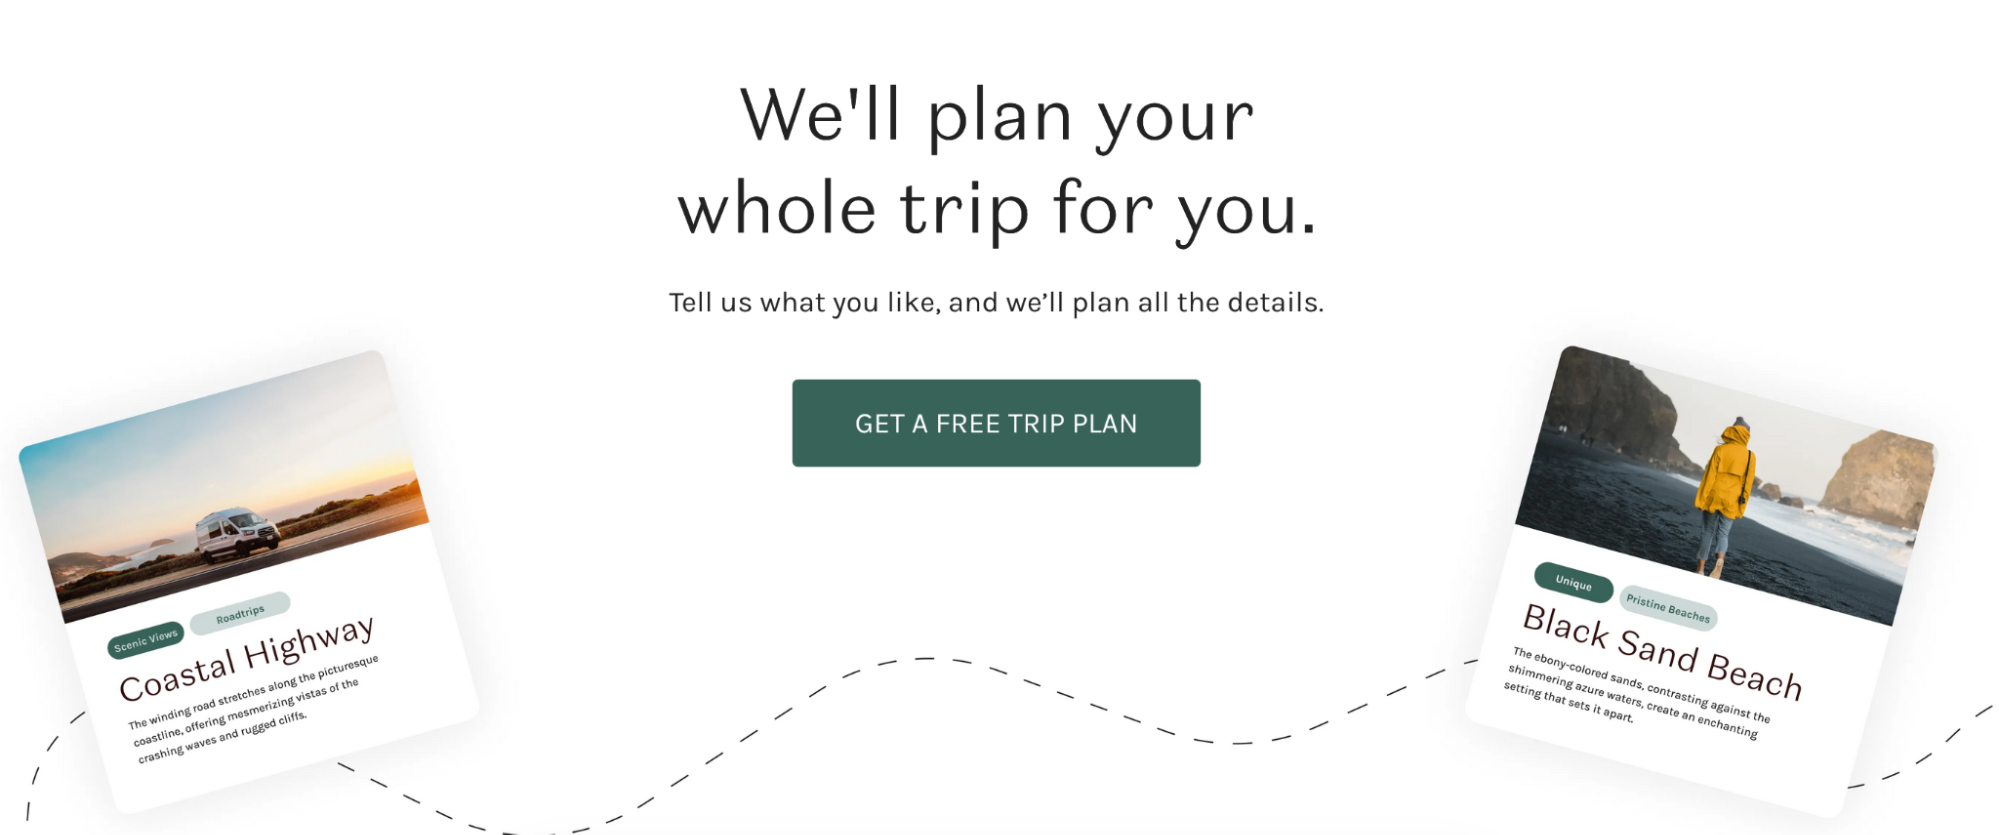 Cabana customers can fill out this typeform in exchange for a free trip plan.
